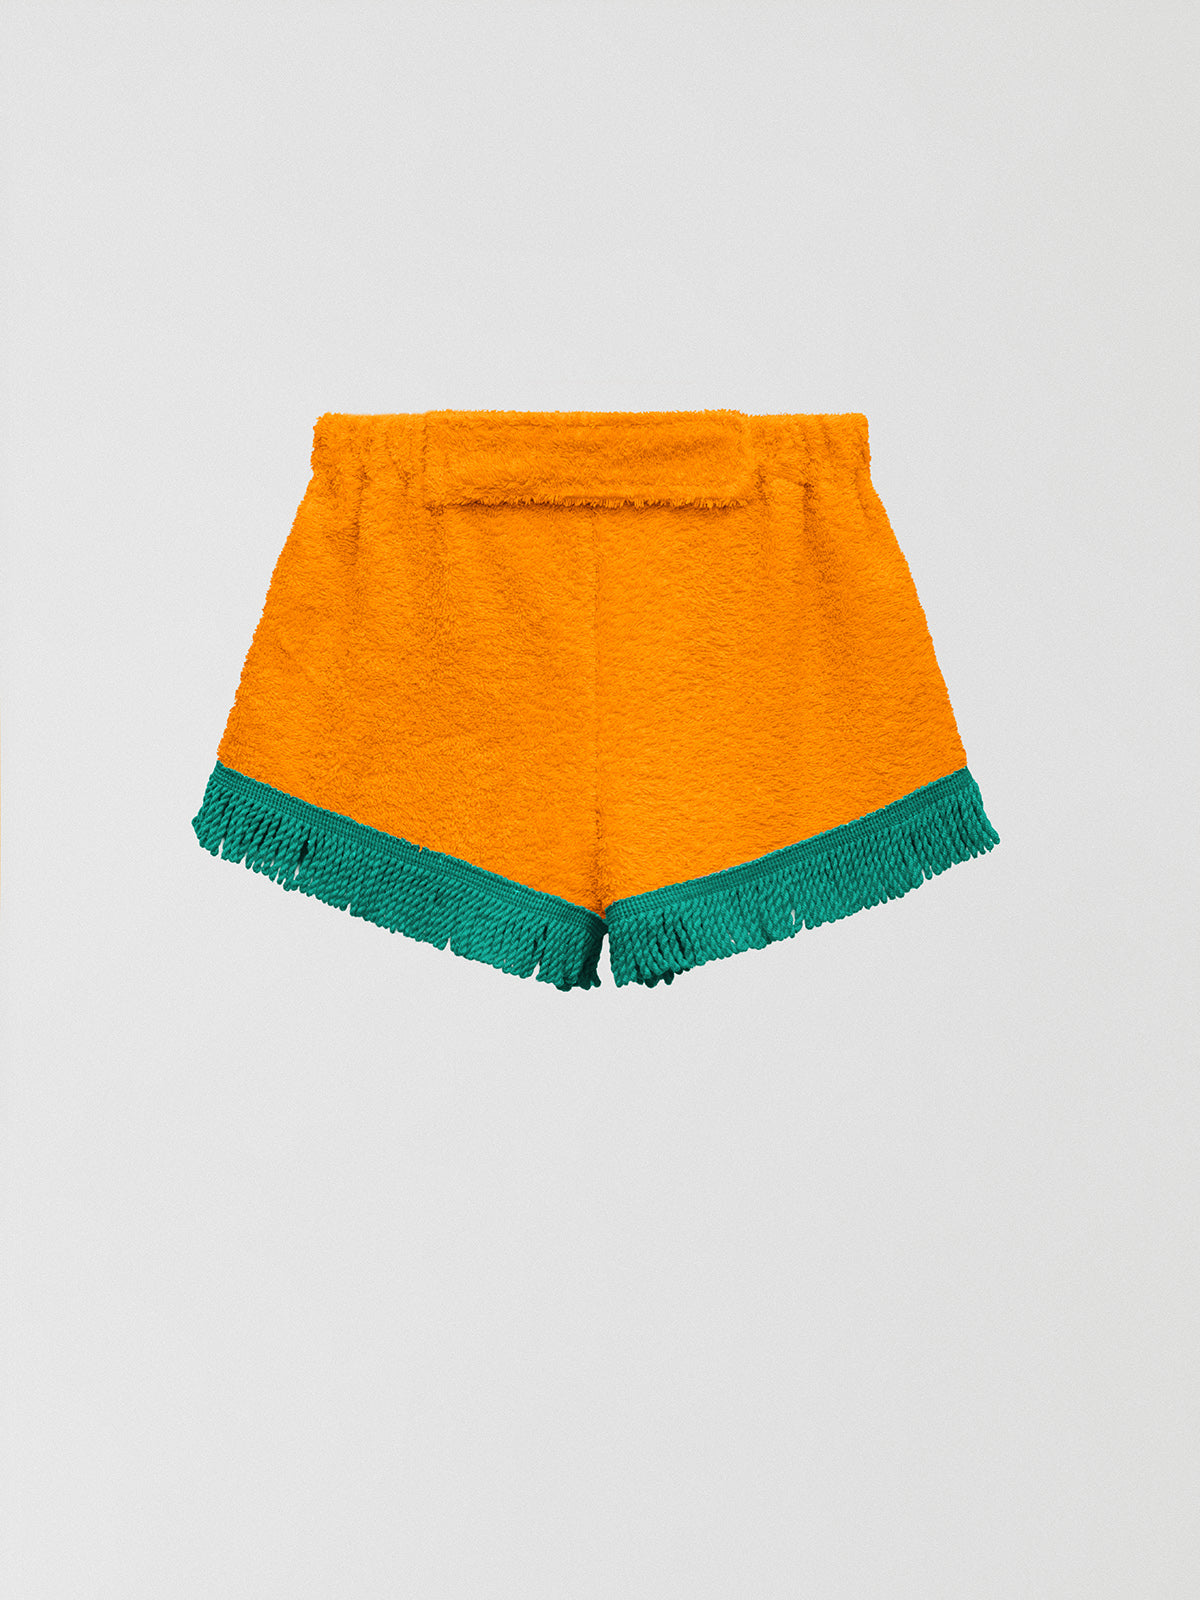 Towel shorts made in orange cotton with green fringes. 